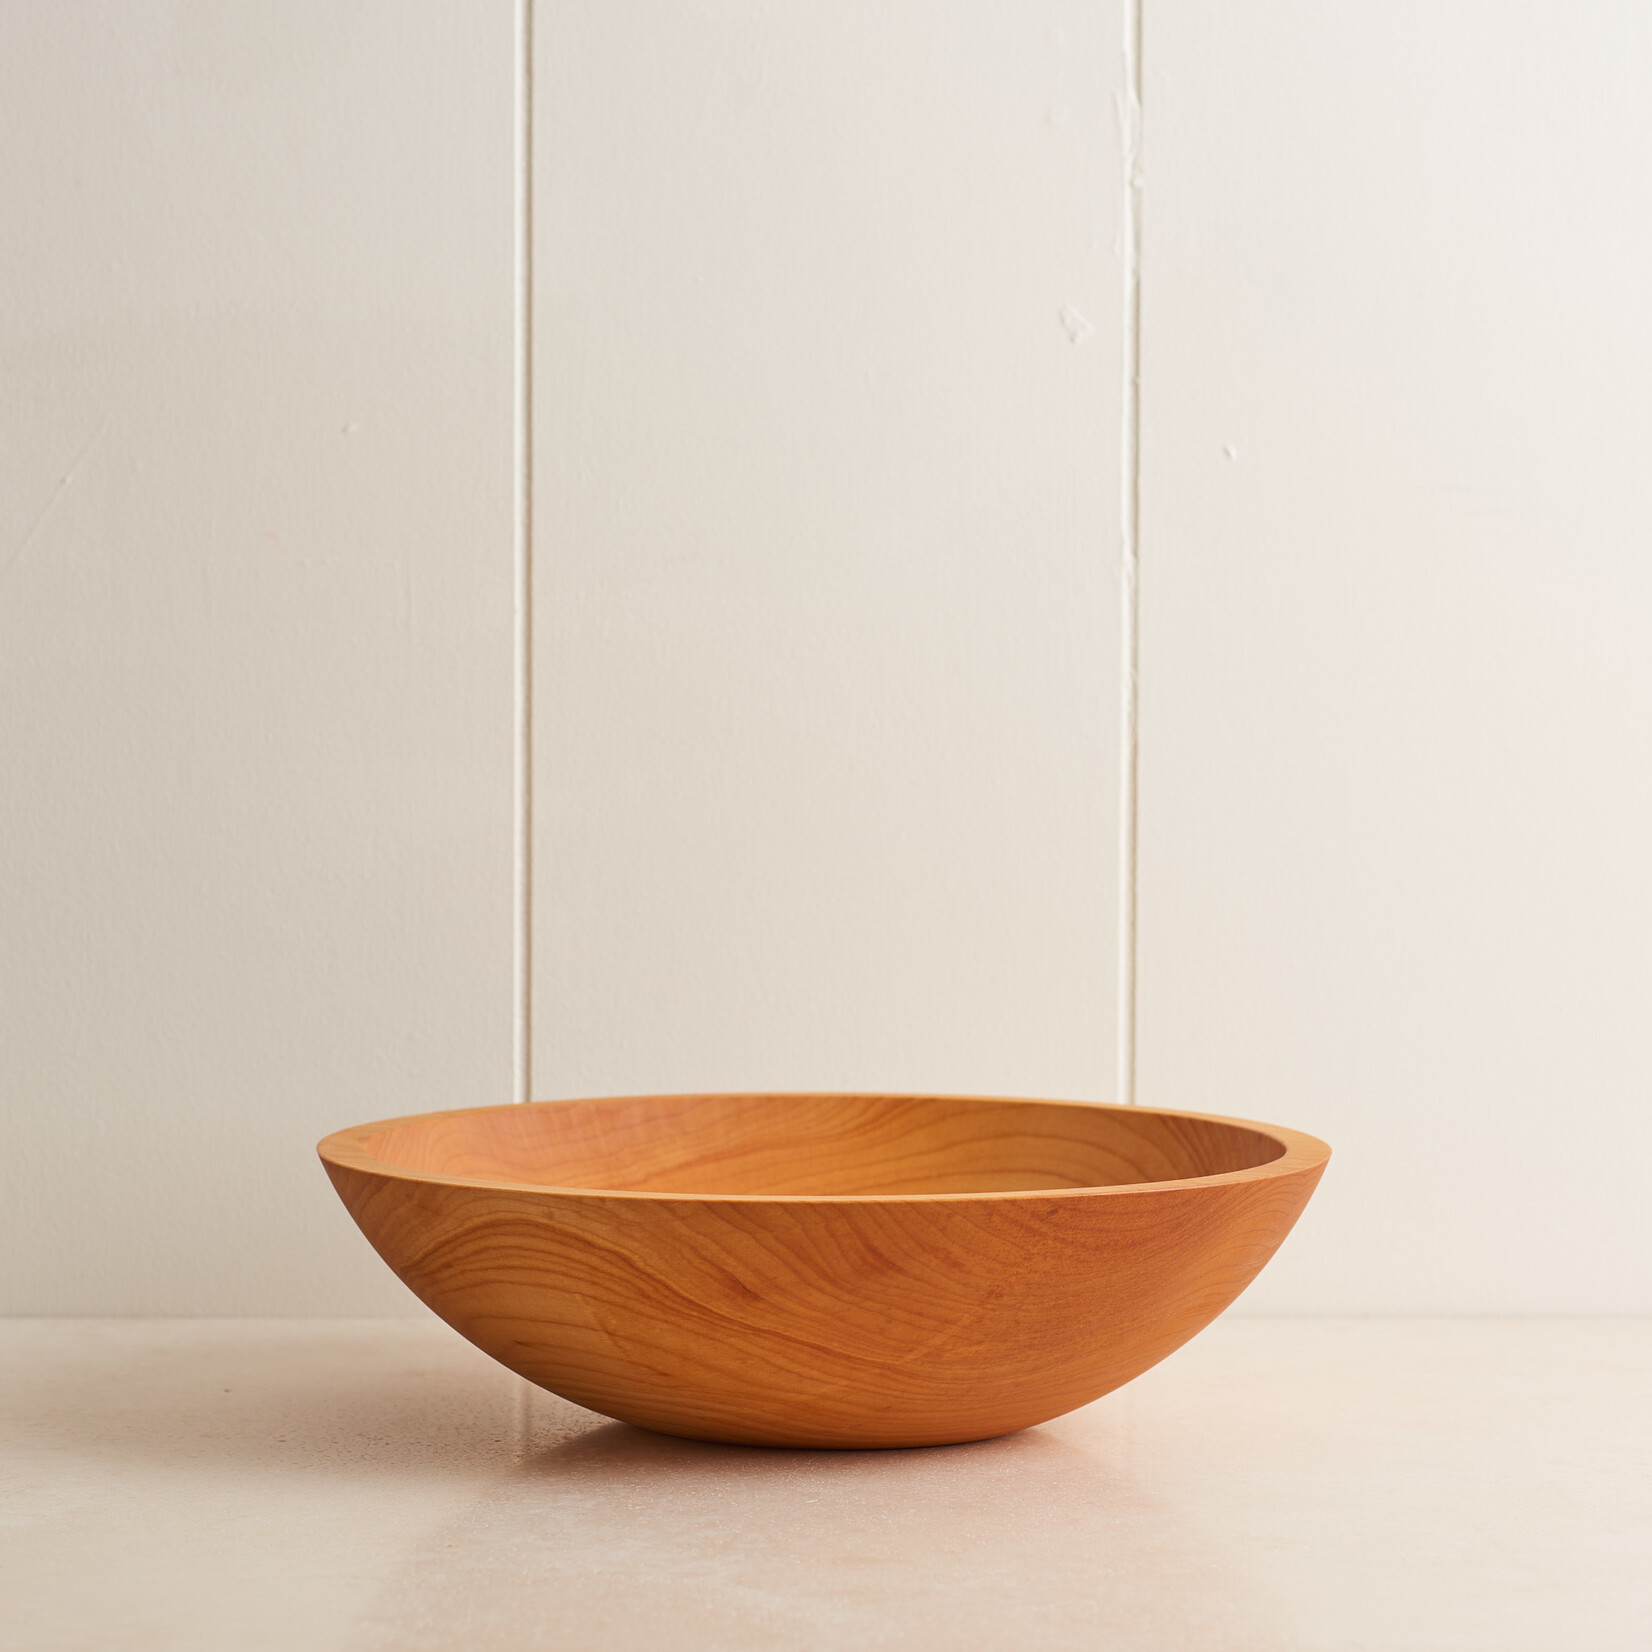 12" Maple Wooden Bowl